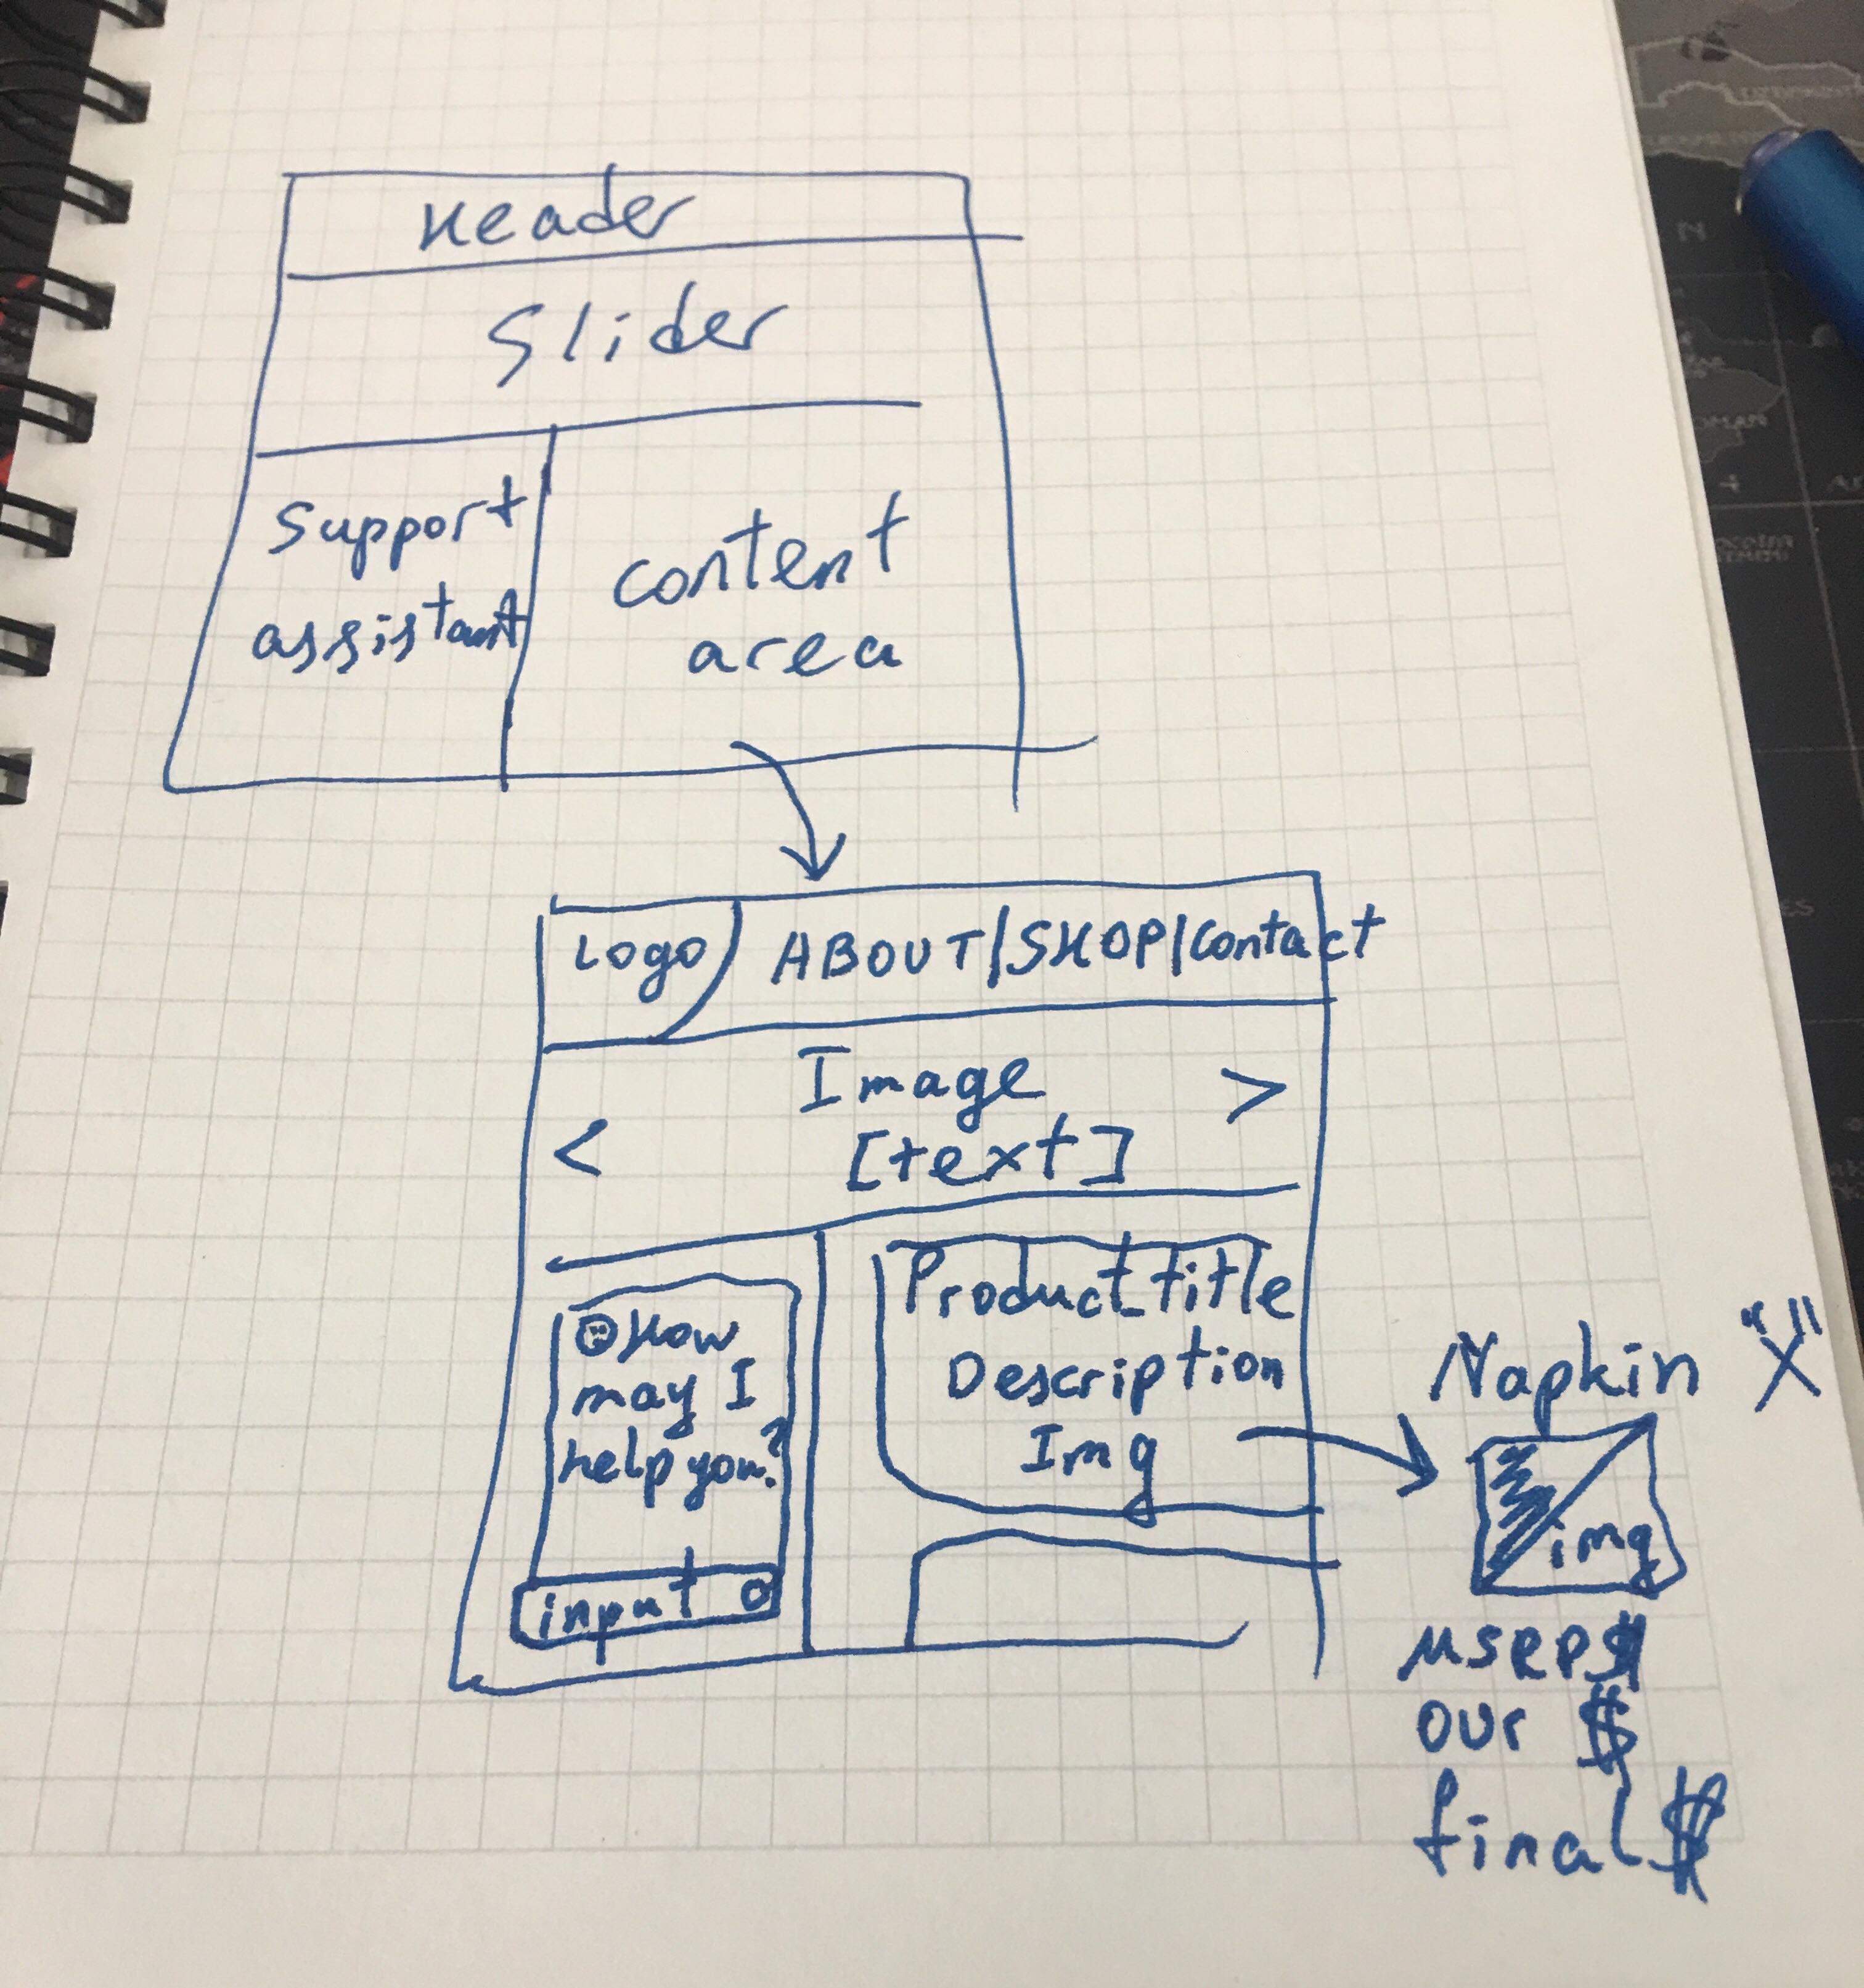 Photo of a real-world sketch of project wireframes on a paper